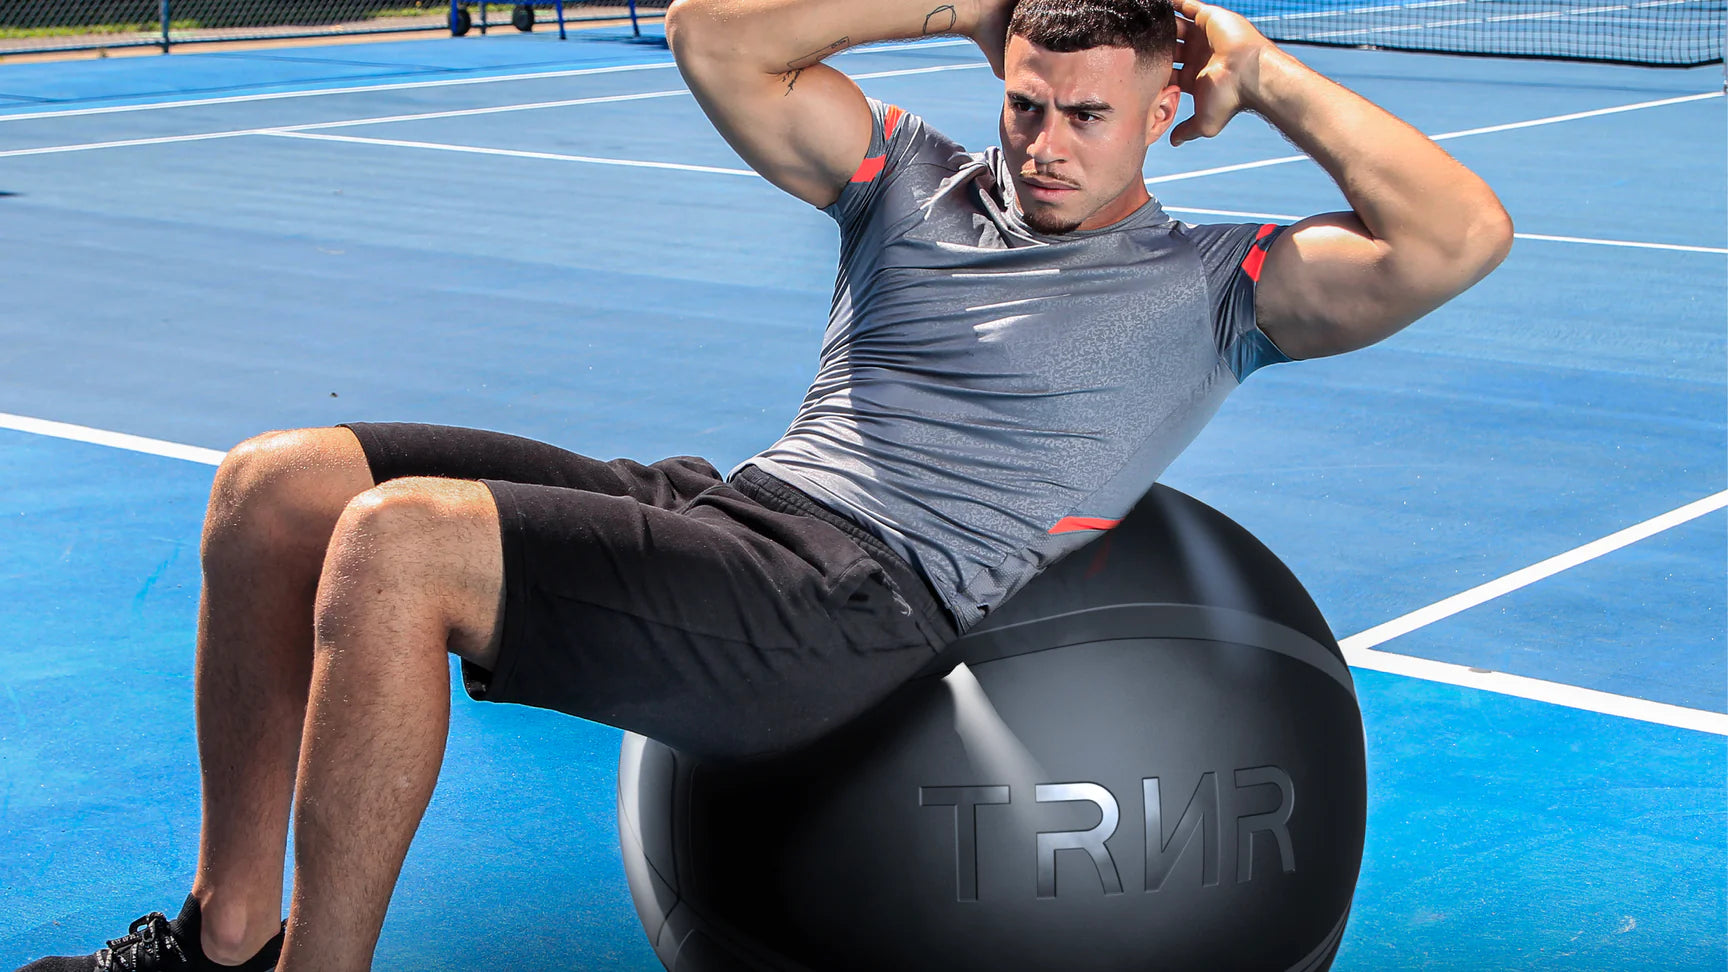 Top 5 Reasons Why You Should Use a Gym Ball